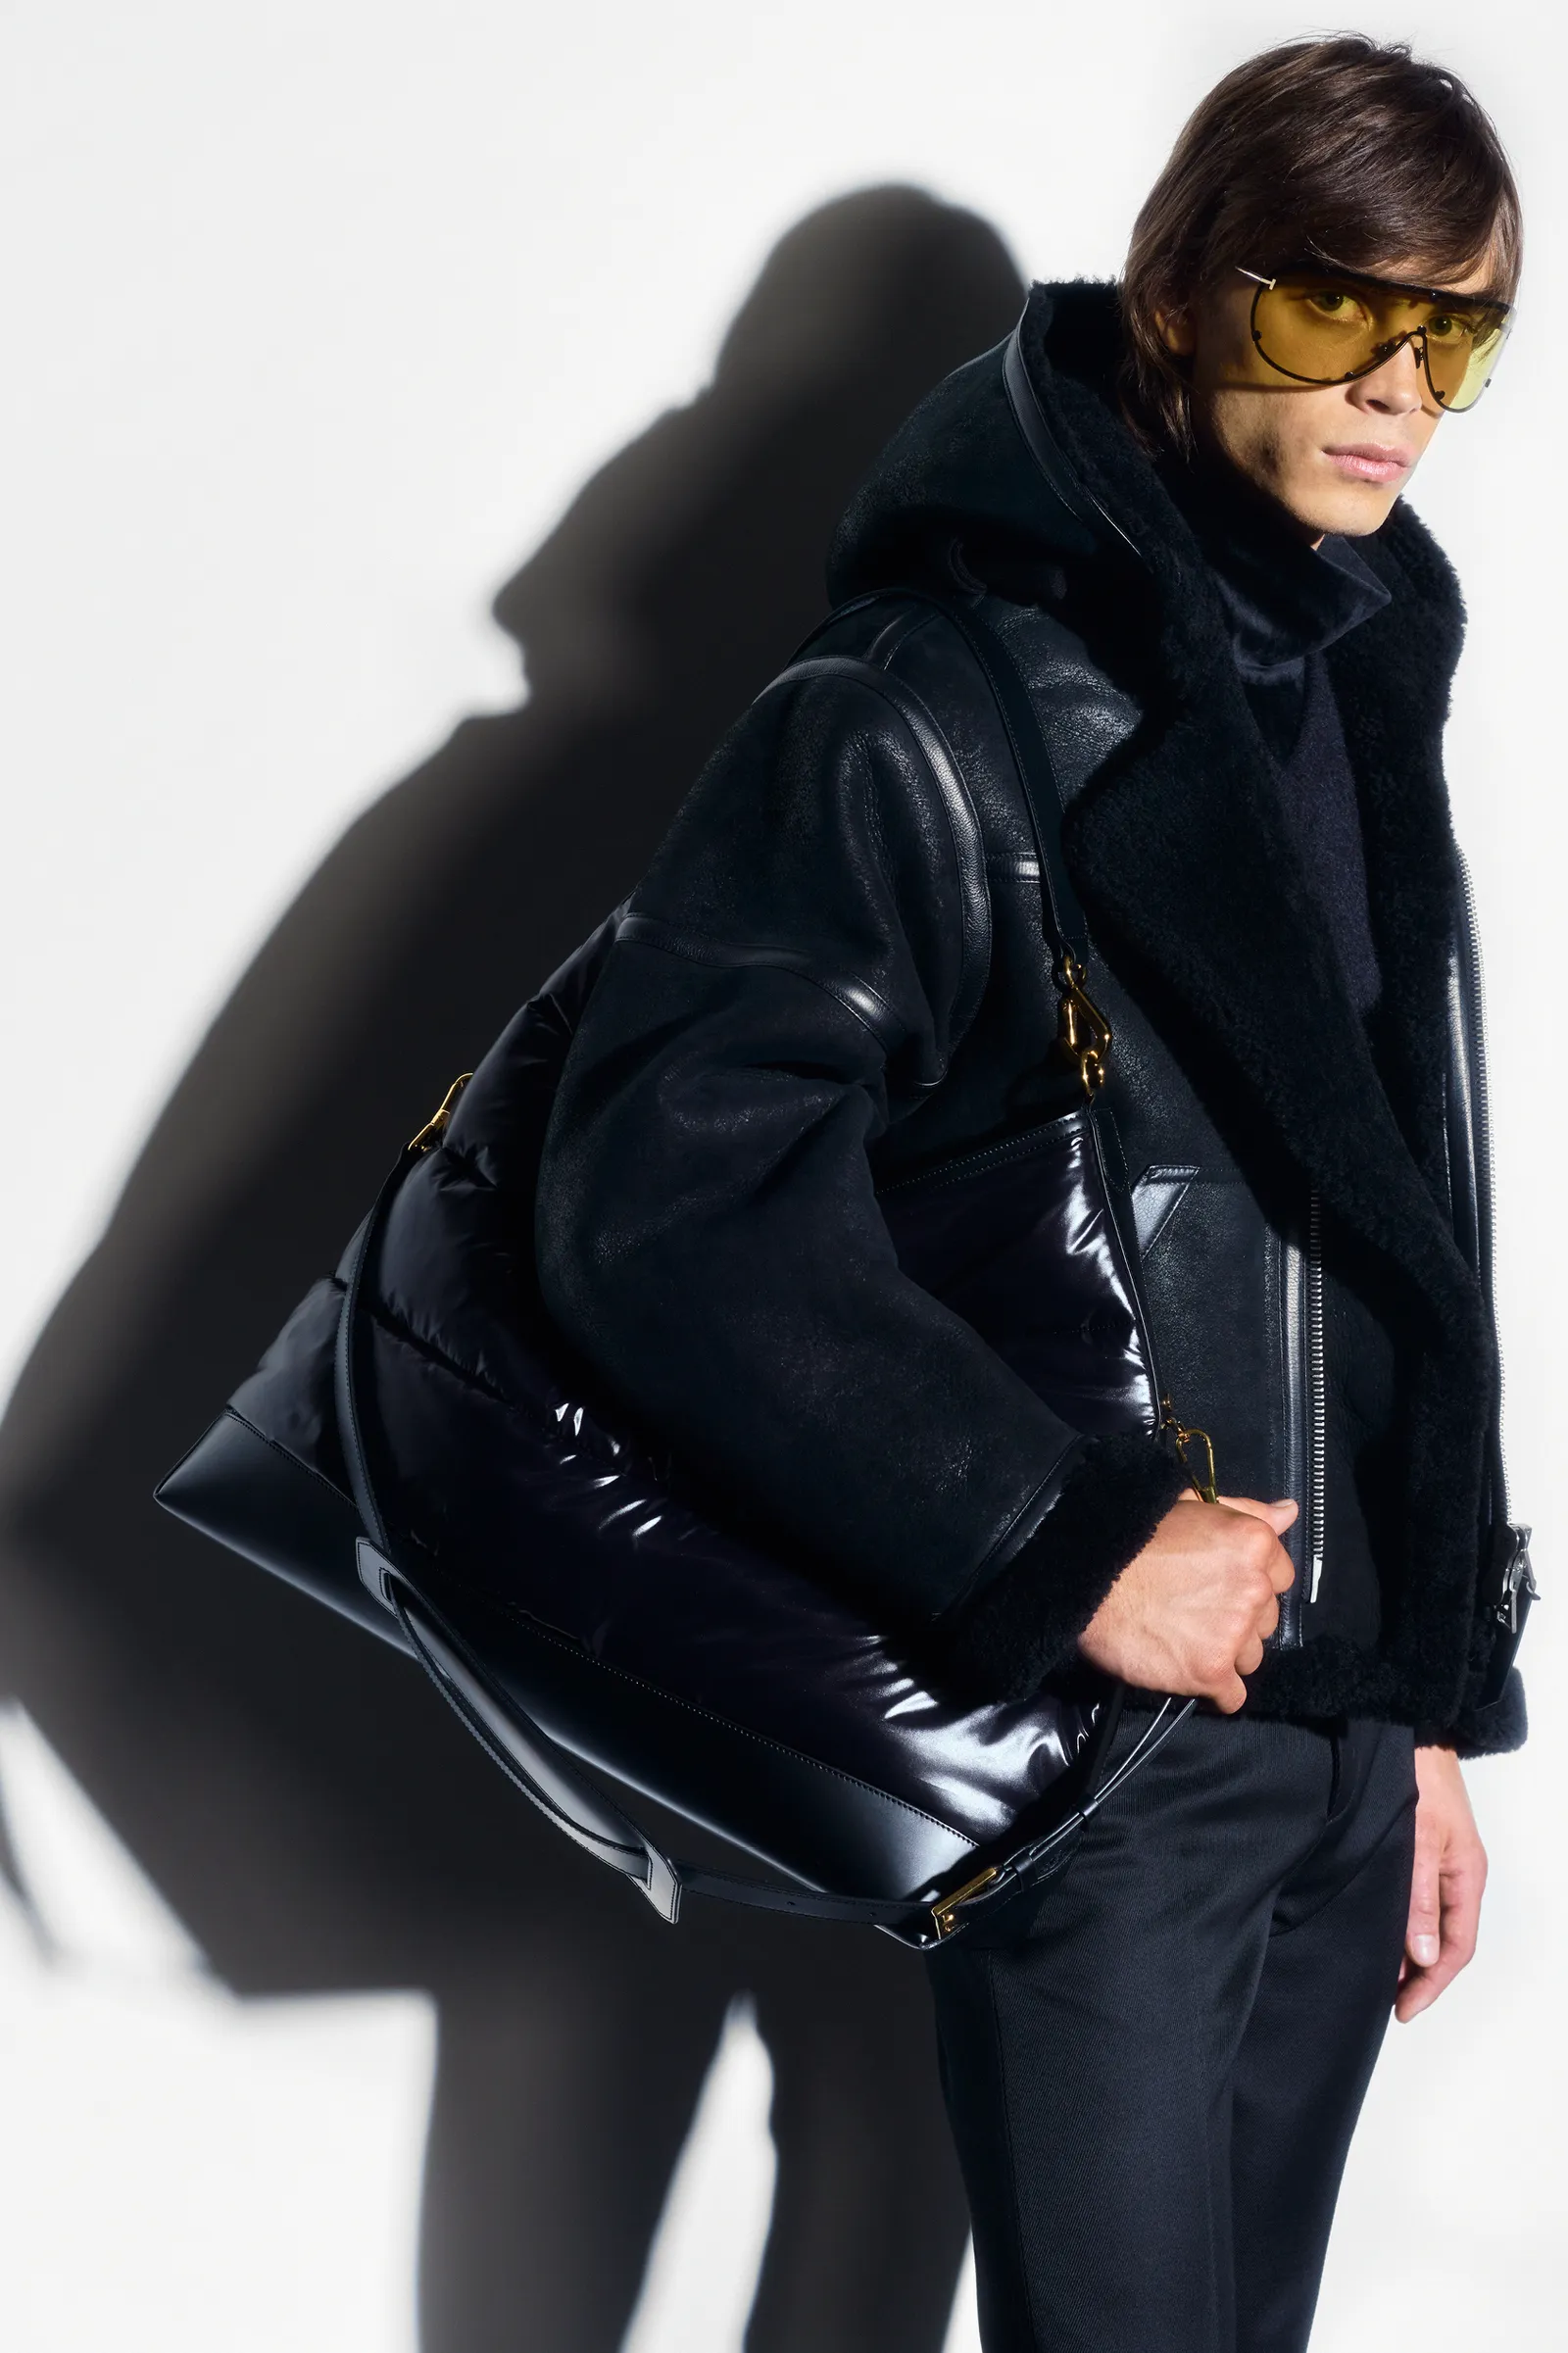 00027-tom-ford-fall-22-mens-nyc-credit-brand.png